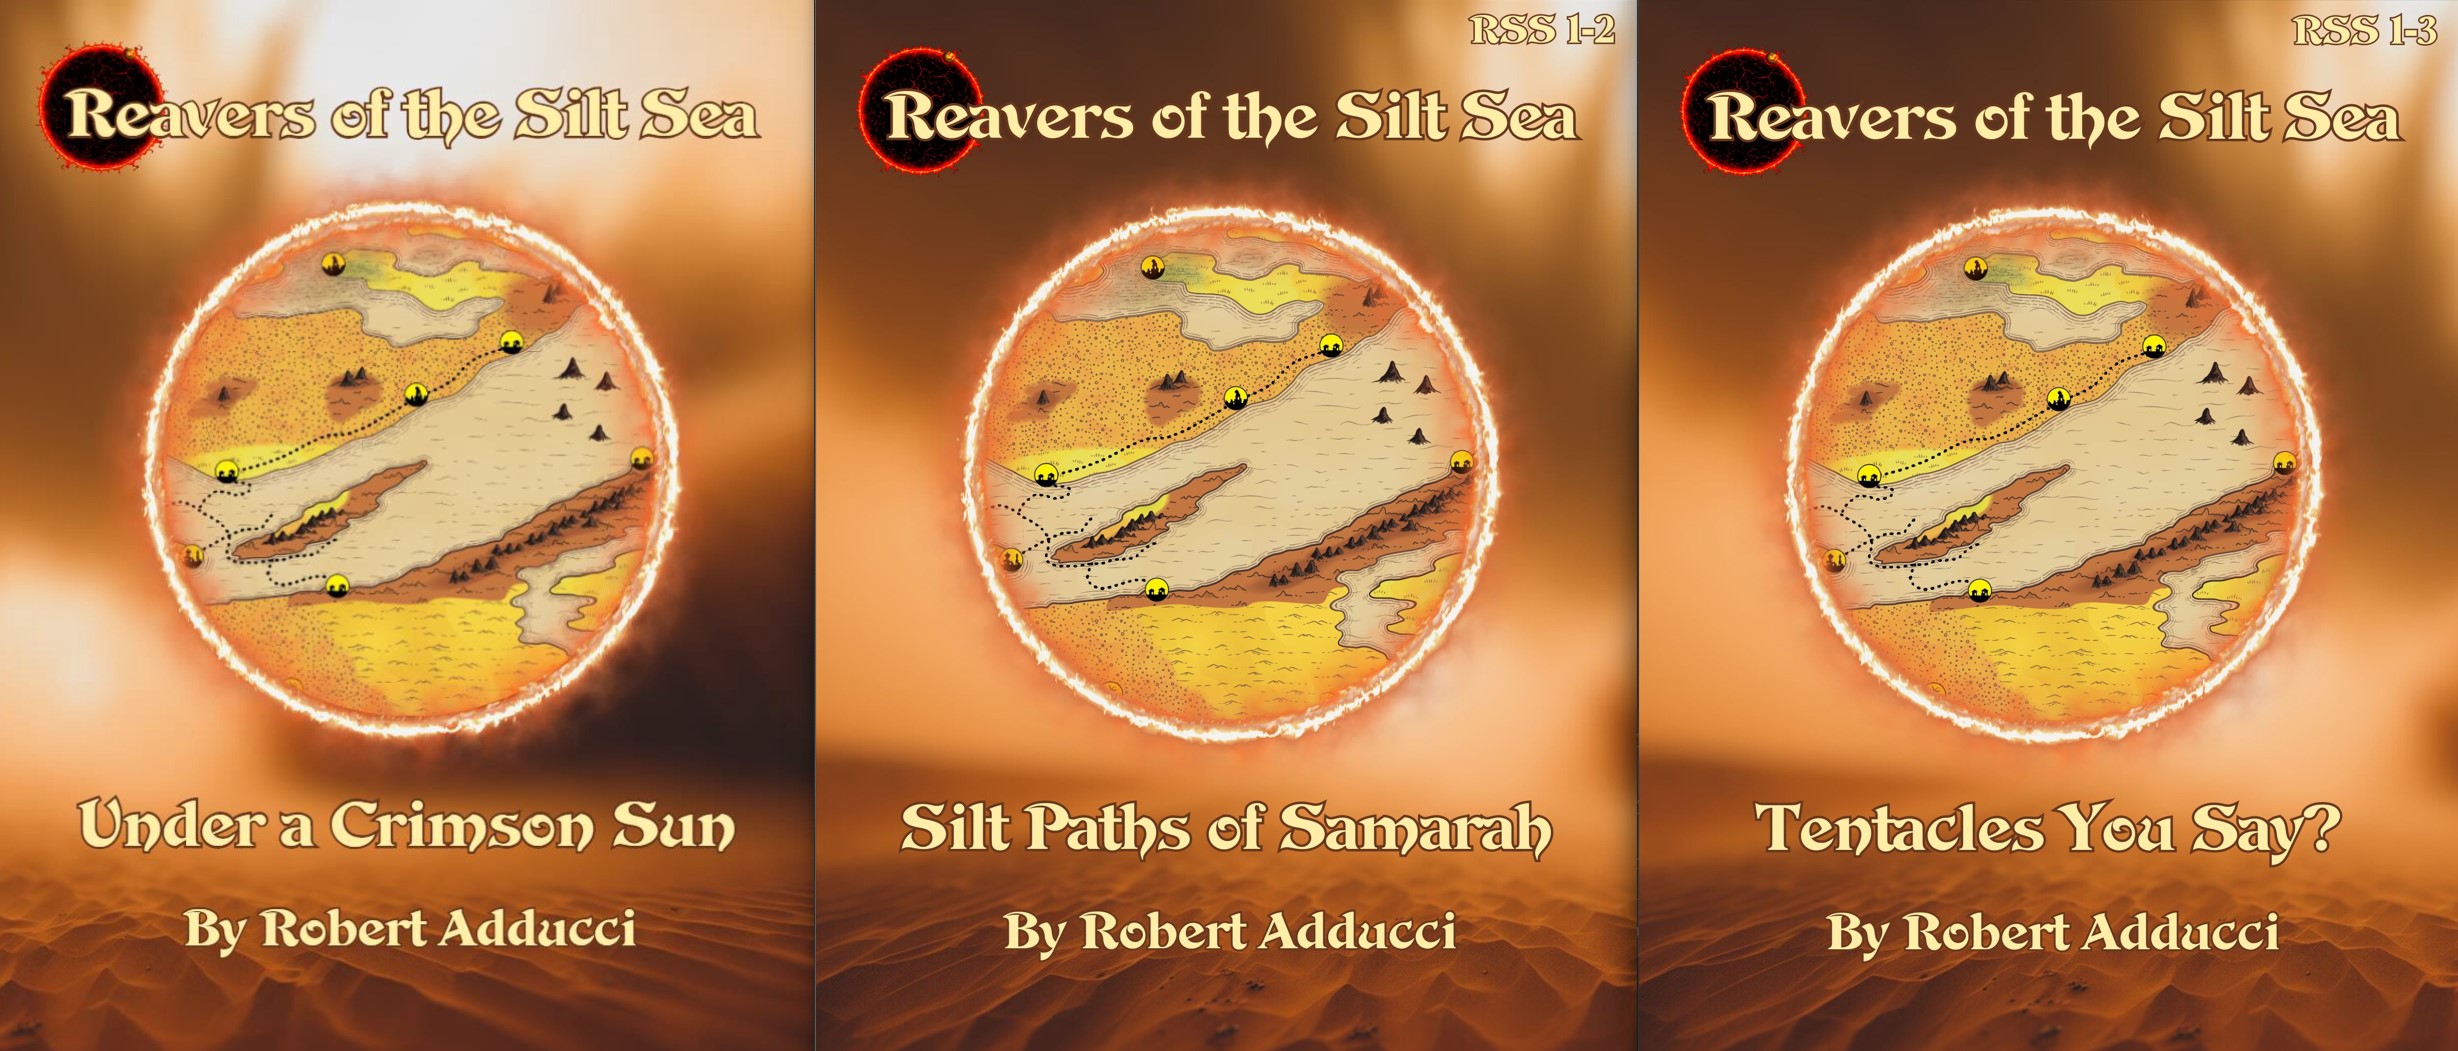 3 Covers to the Silt Paths of Samarah trilogy of the Reavers of the Silt Sea Organized Play campaign